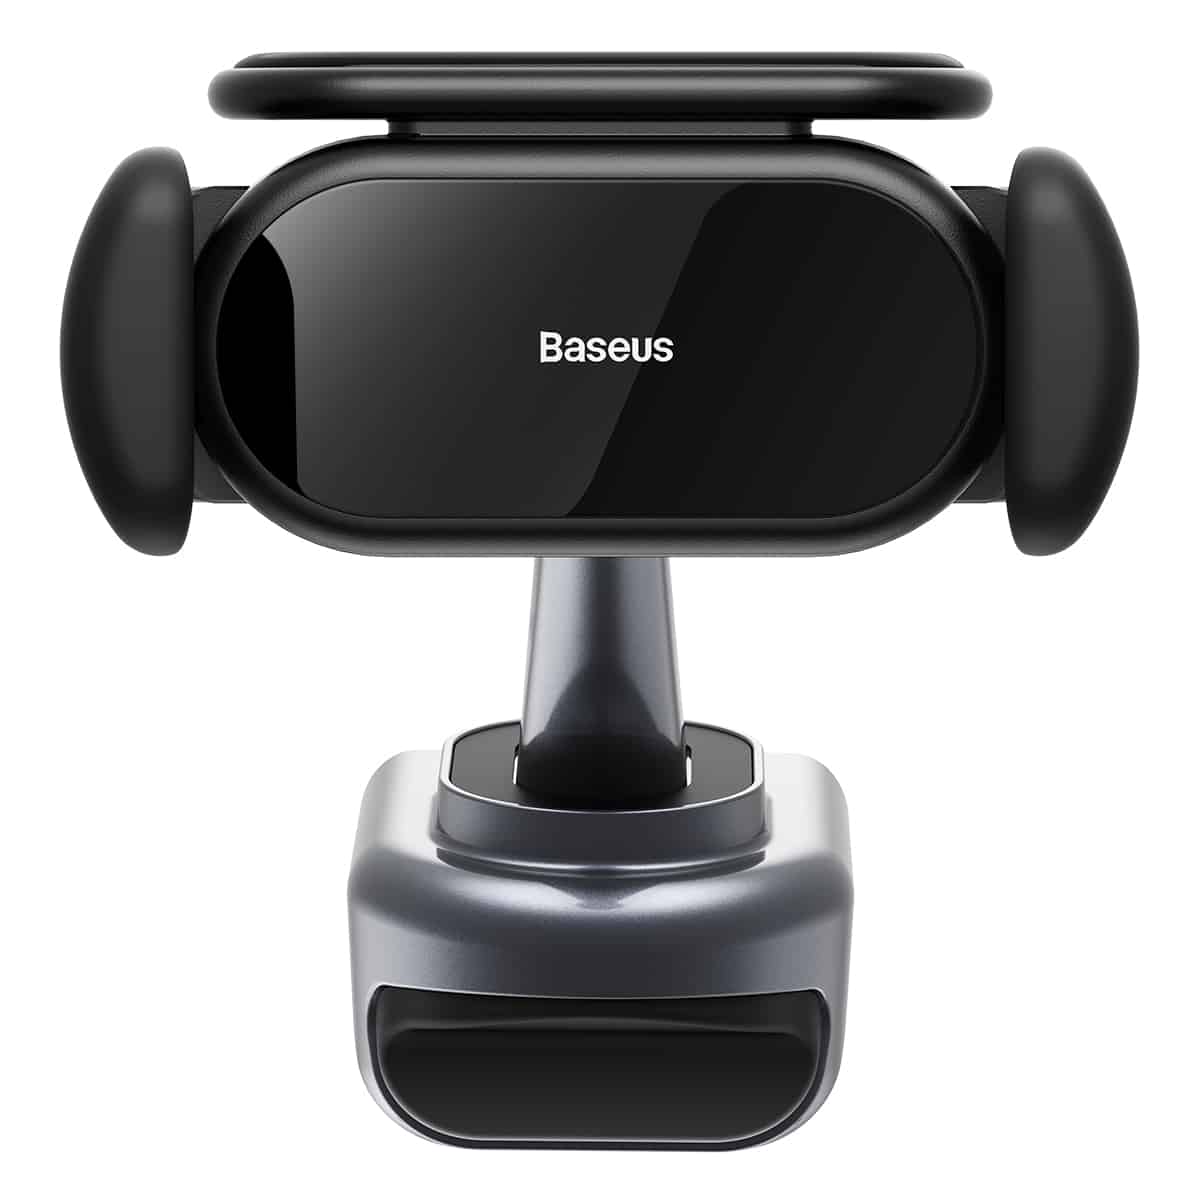 Baseus T-SpaceSeries Sola Electric Car Mount for Tesla